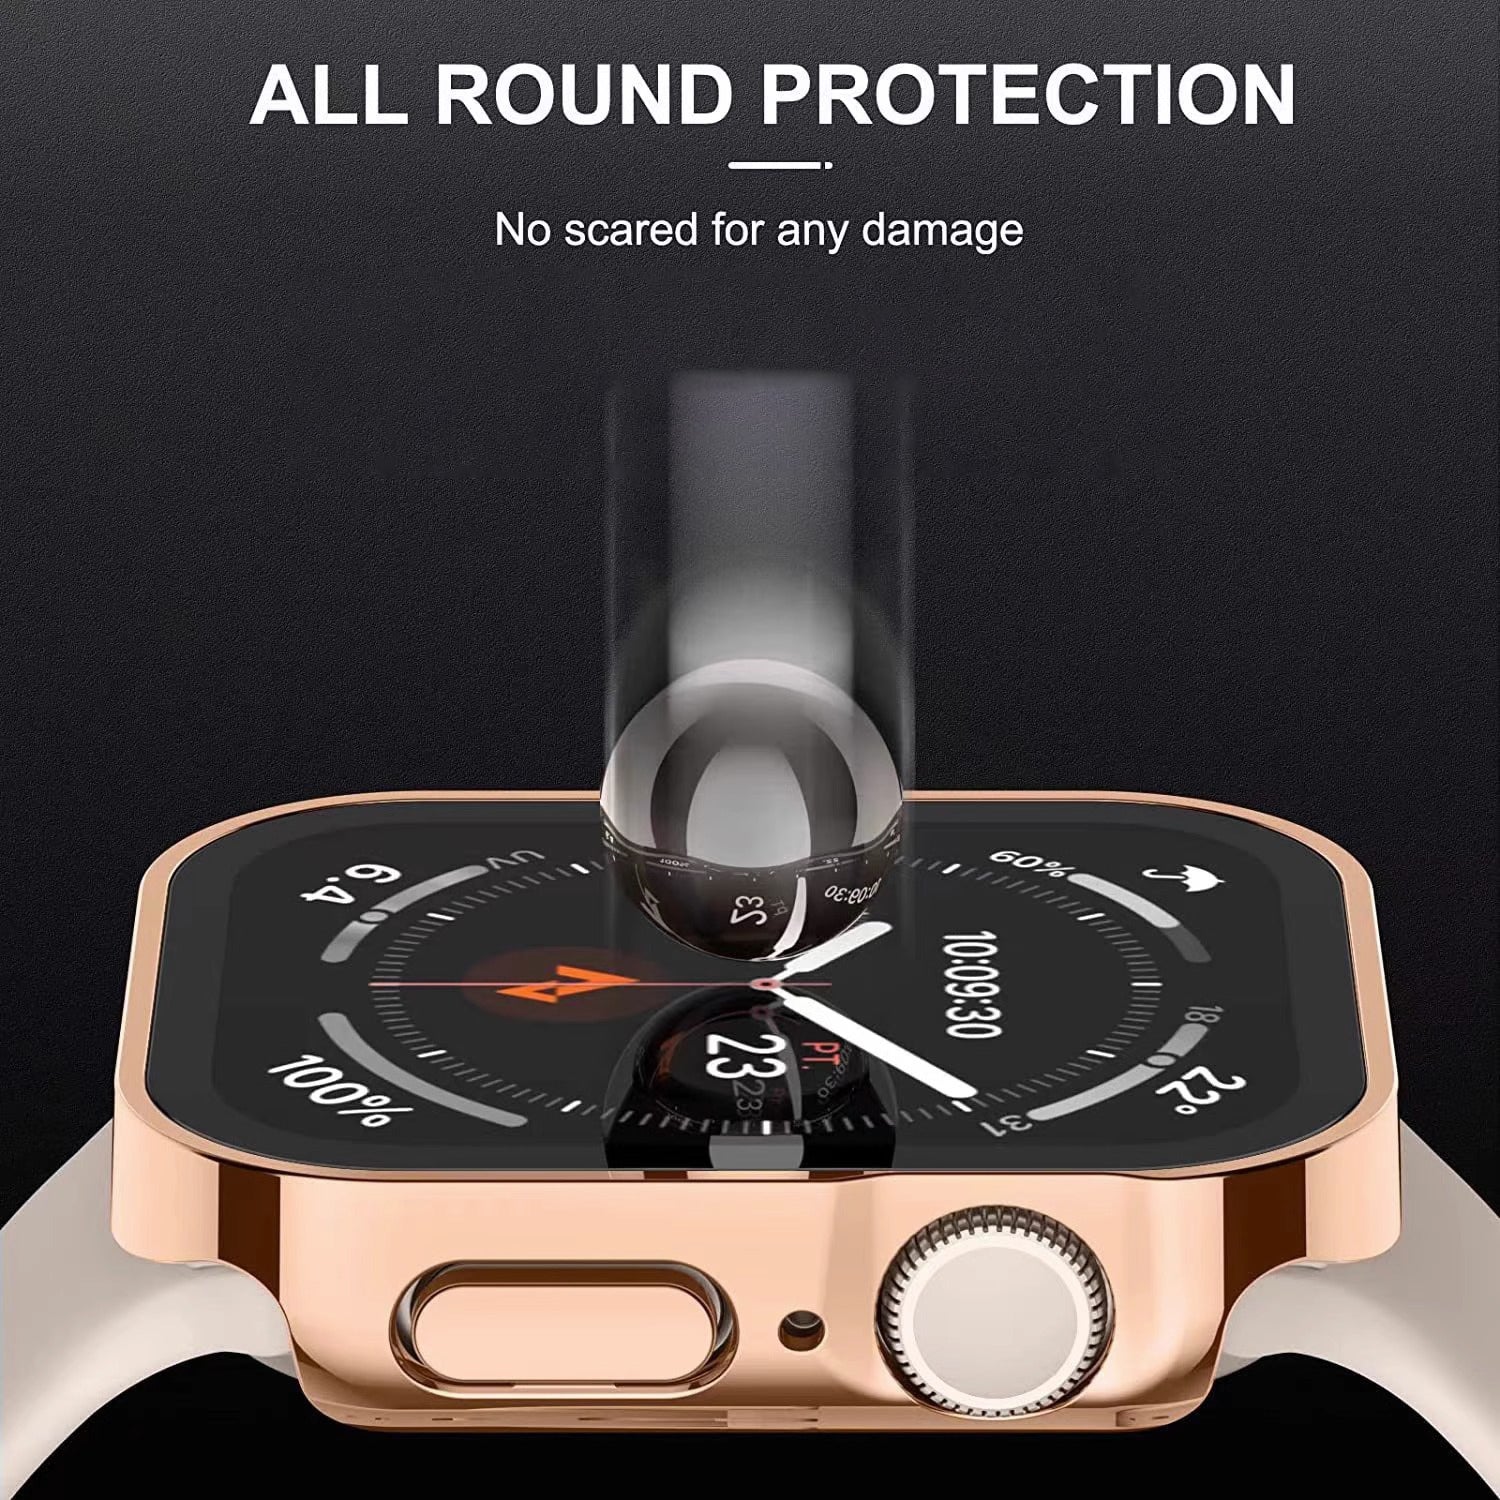 Waterproof Watch Case With Tempered Glass Film